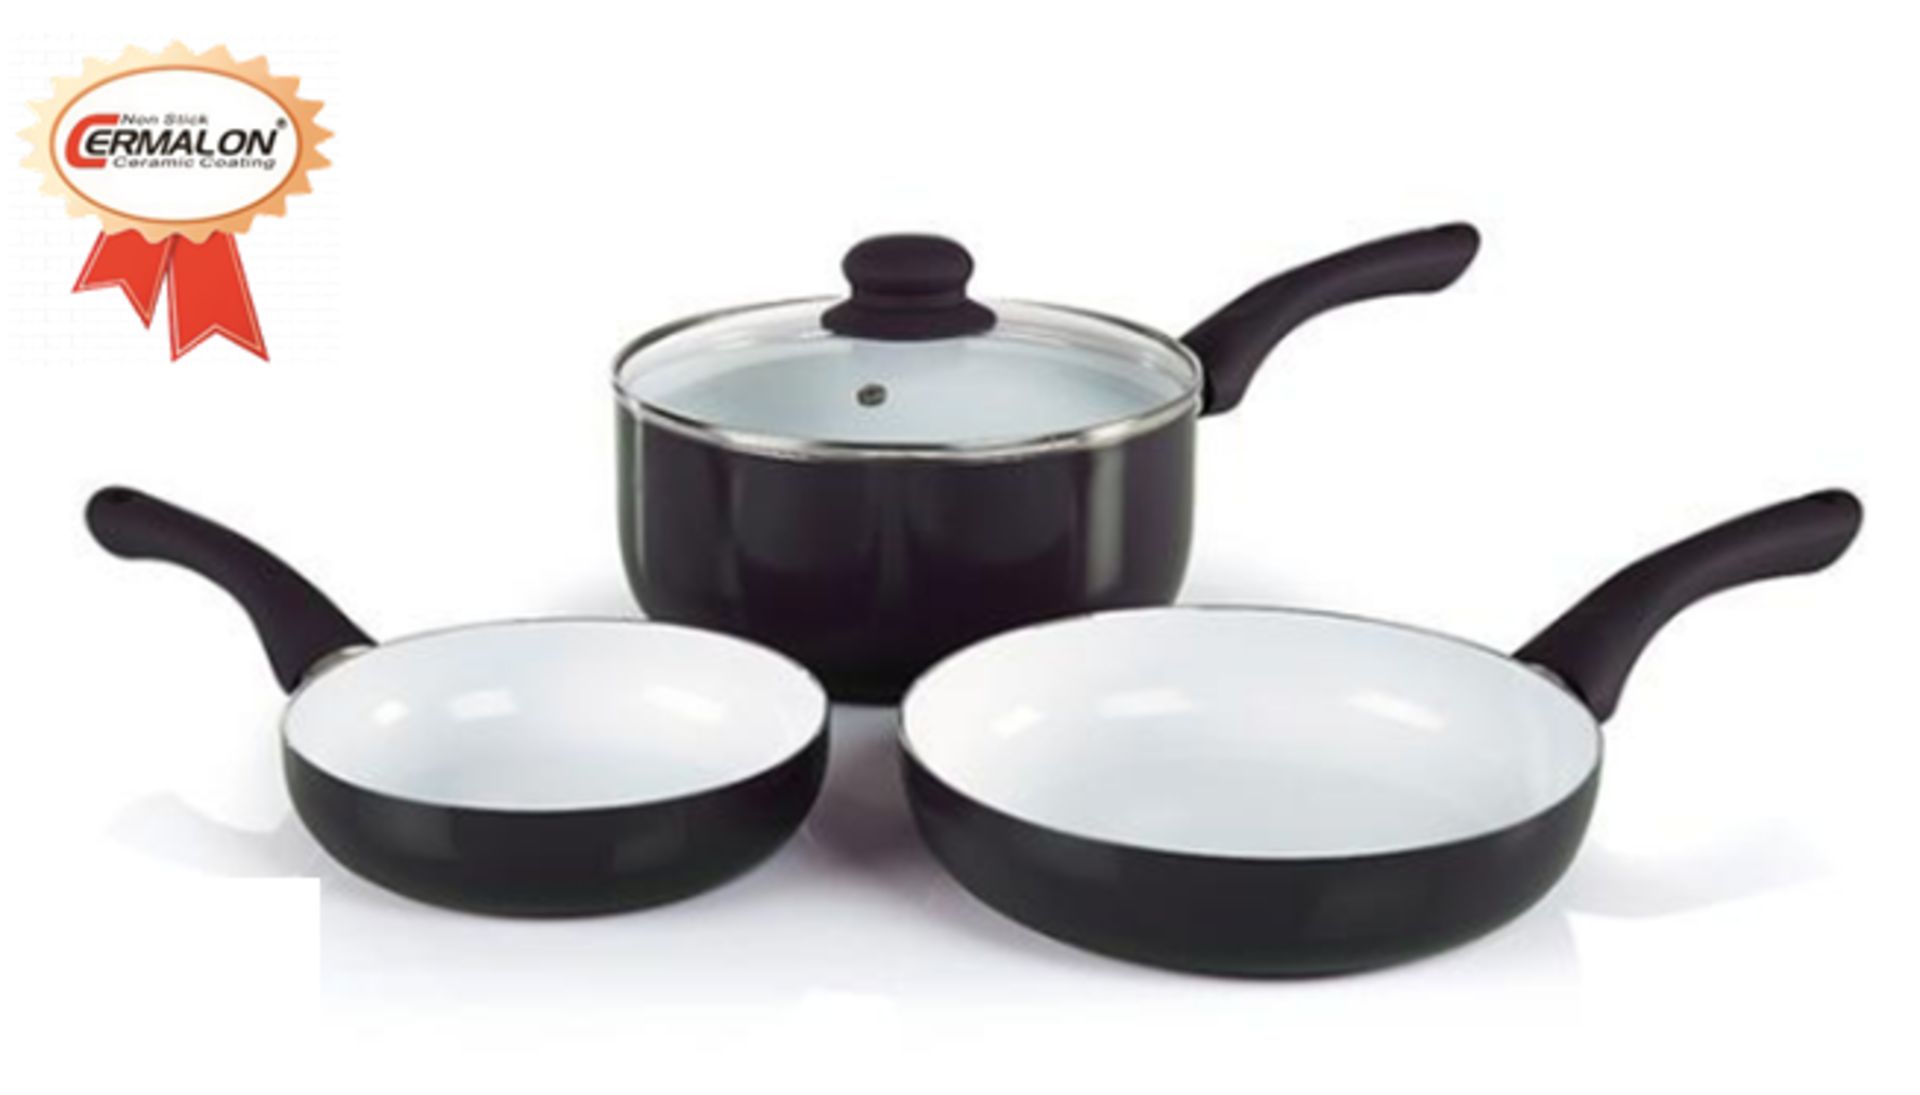 V Brand New 4 PC COOKWARE SET /K129 - 4 PIECE SET: CERAMIC COATED FRYING PAN AND SAUCE PAN SET IS